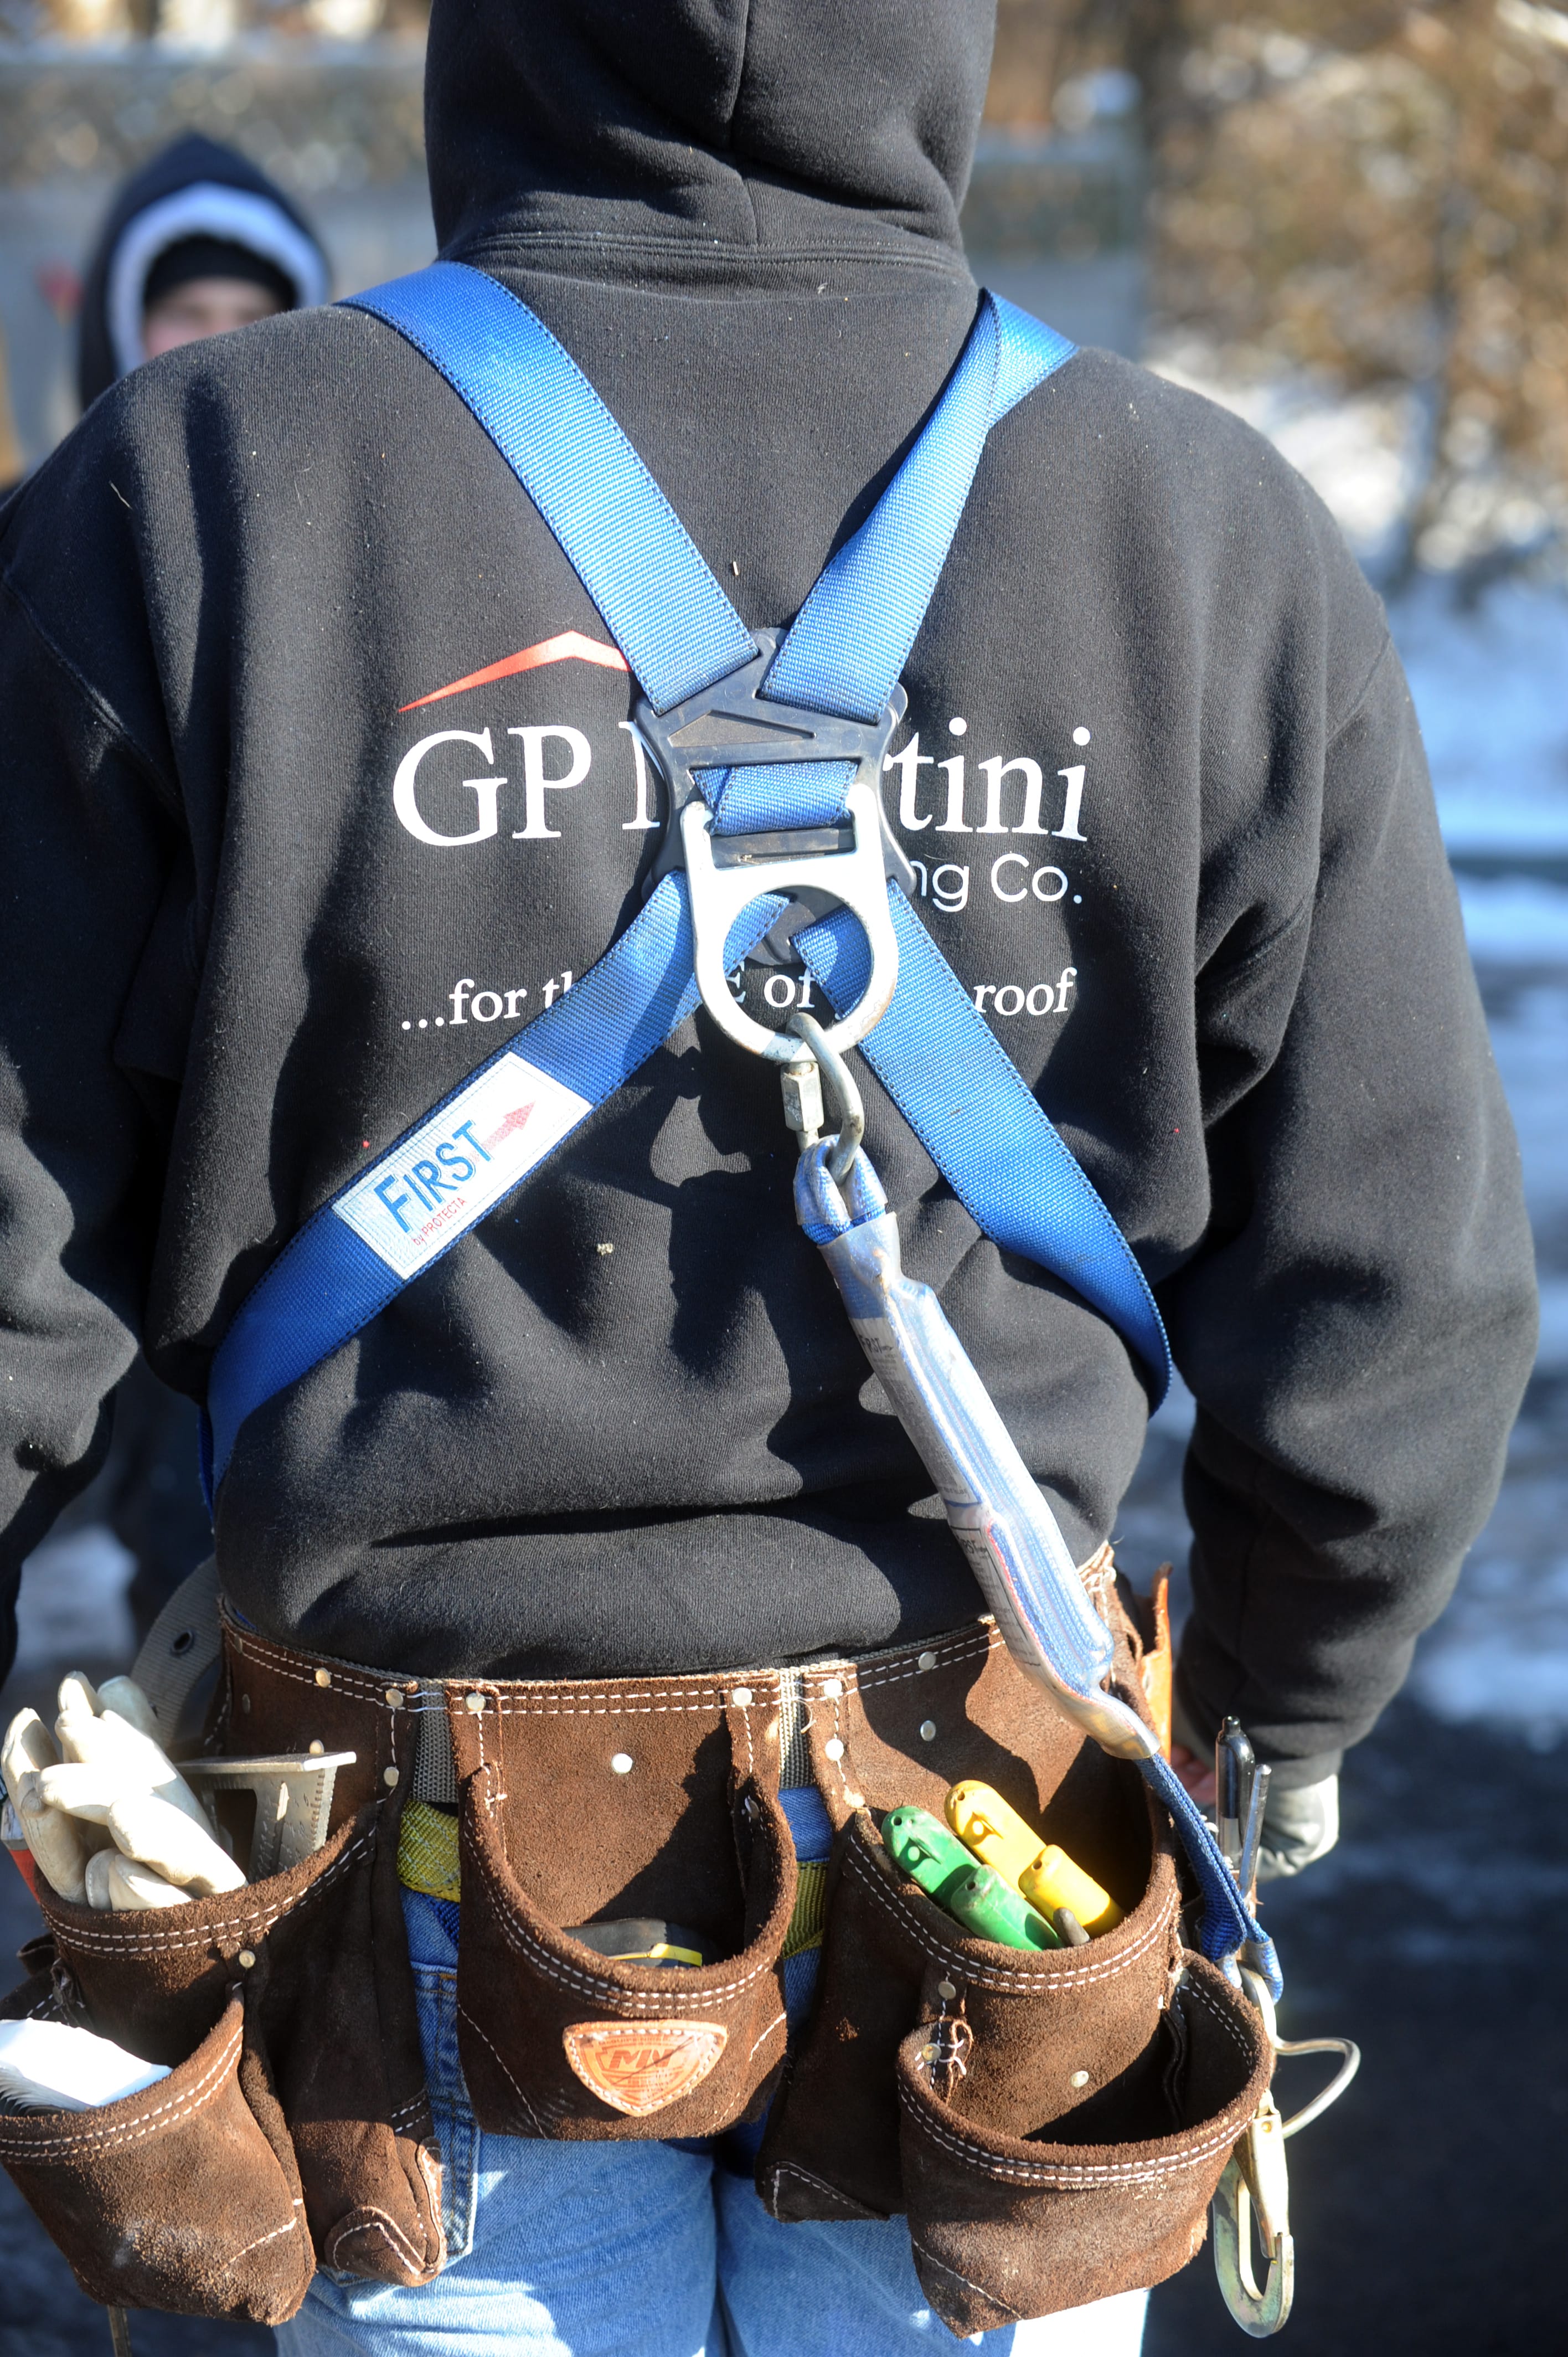 Image of a roofer's harness